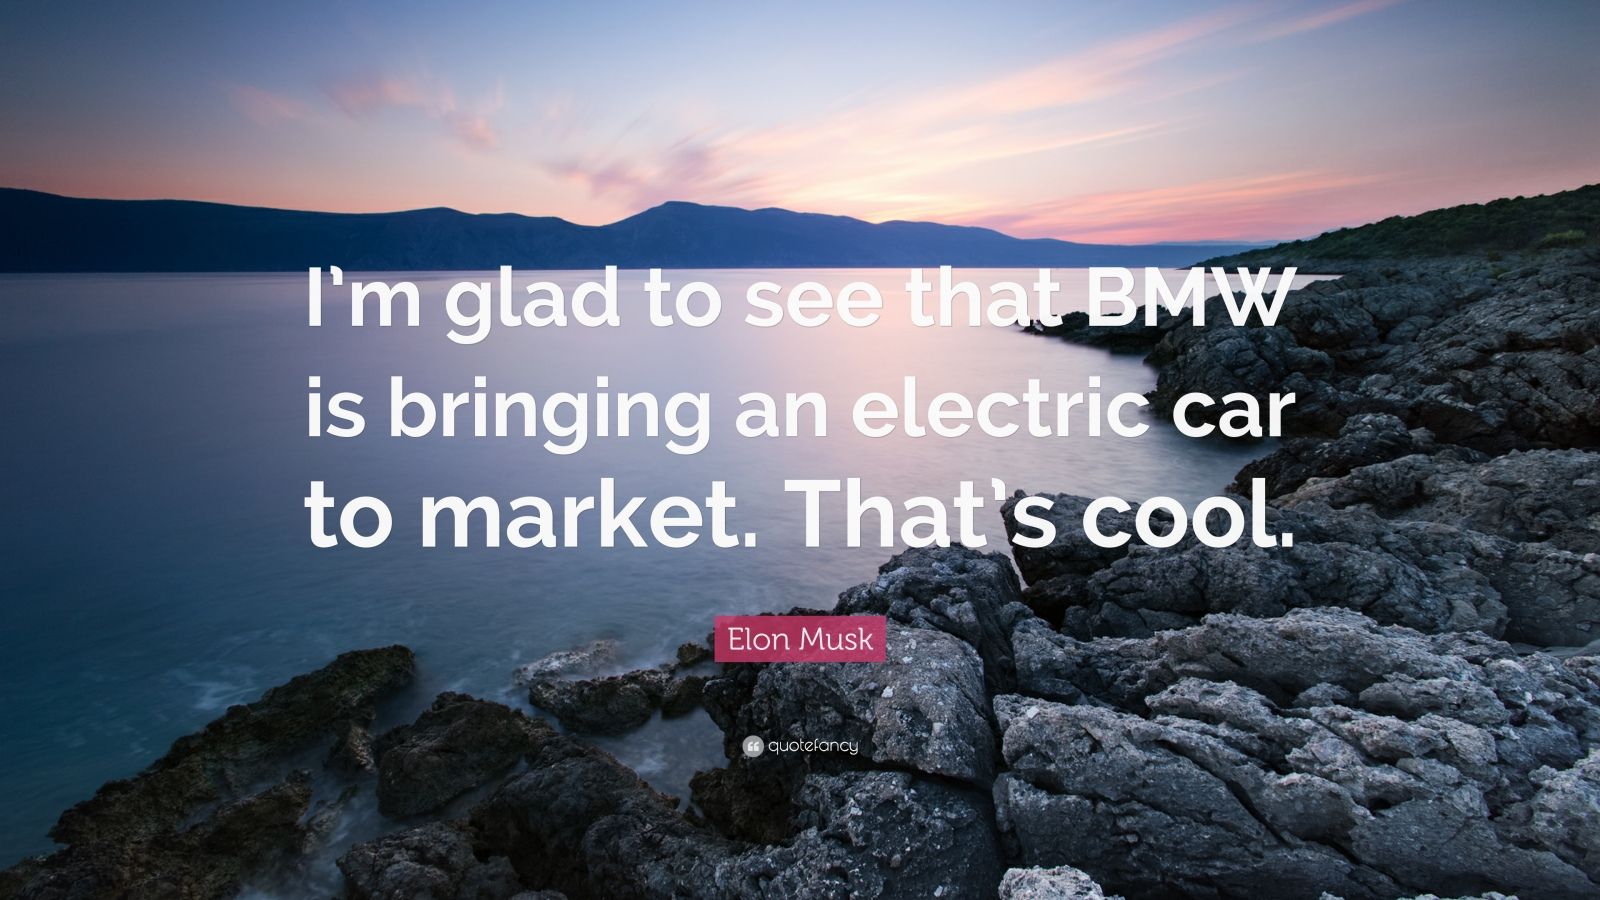 Elon Musk Quote “I’m glad to see that BMW is bringing an electric car